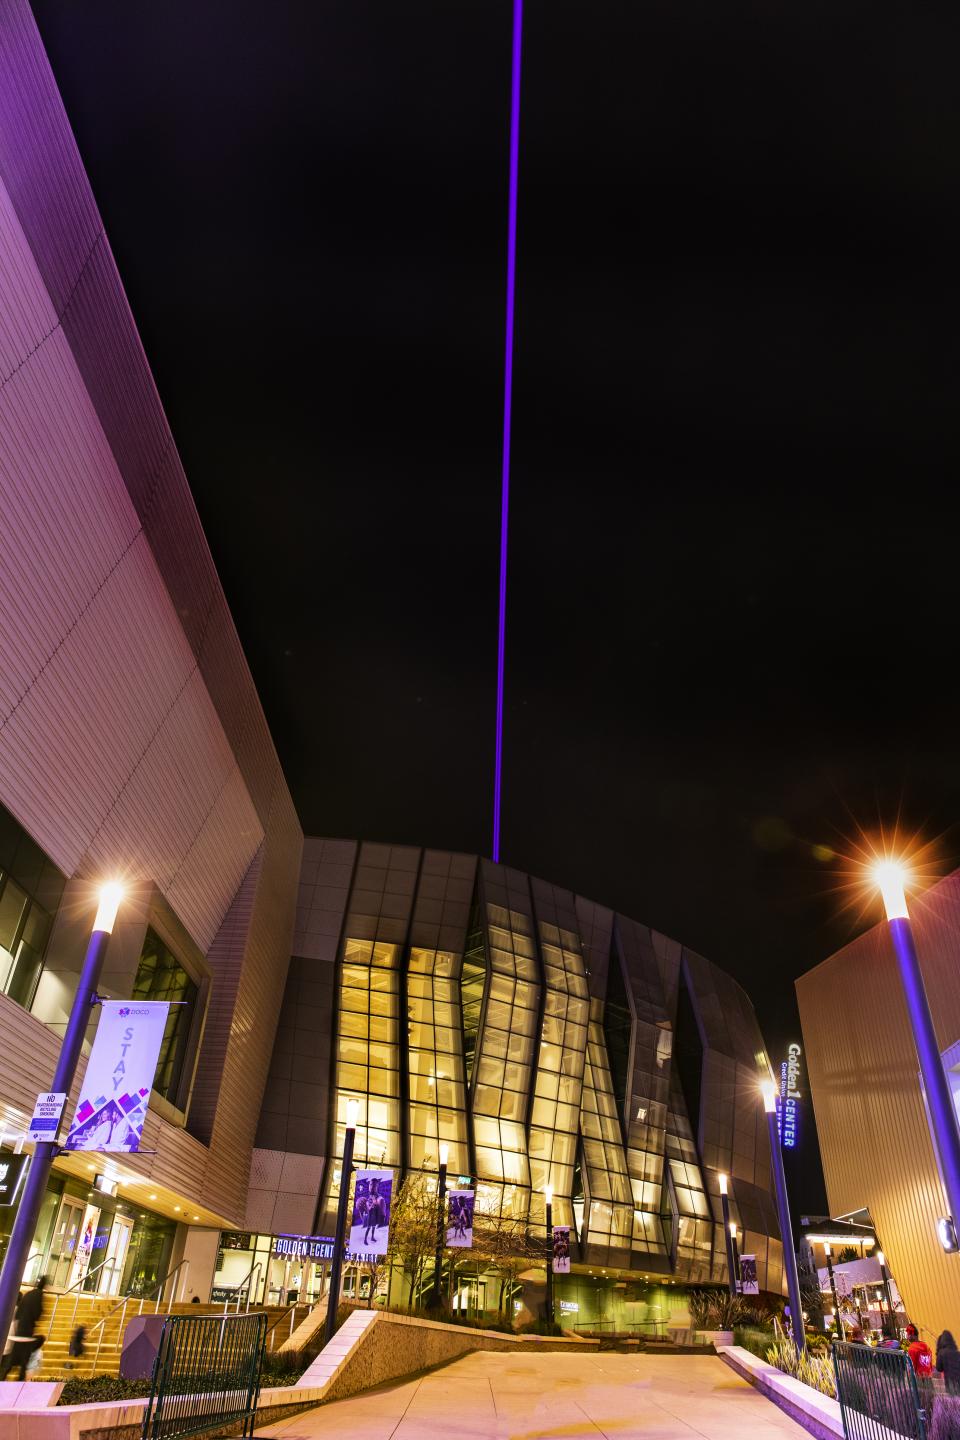 Light The Beam, shown in front of Golden 1 Center after Sacramento Kings win